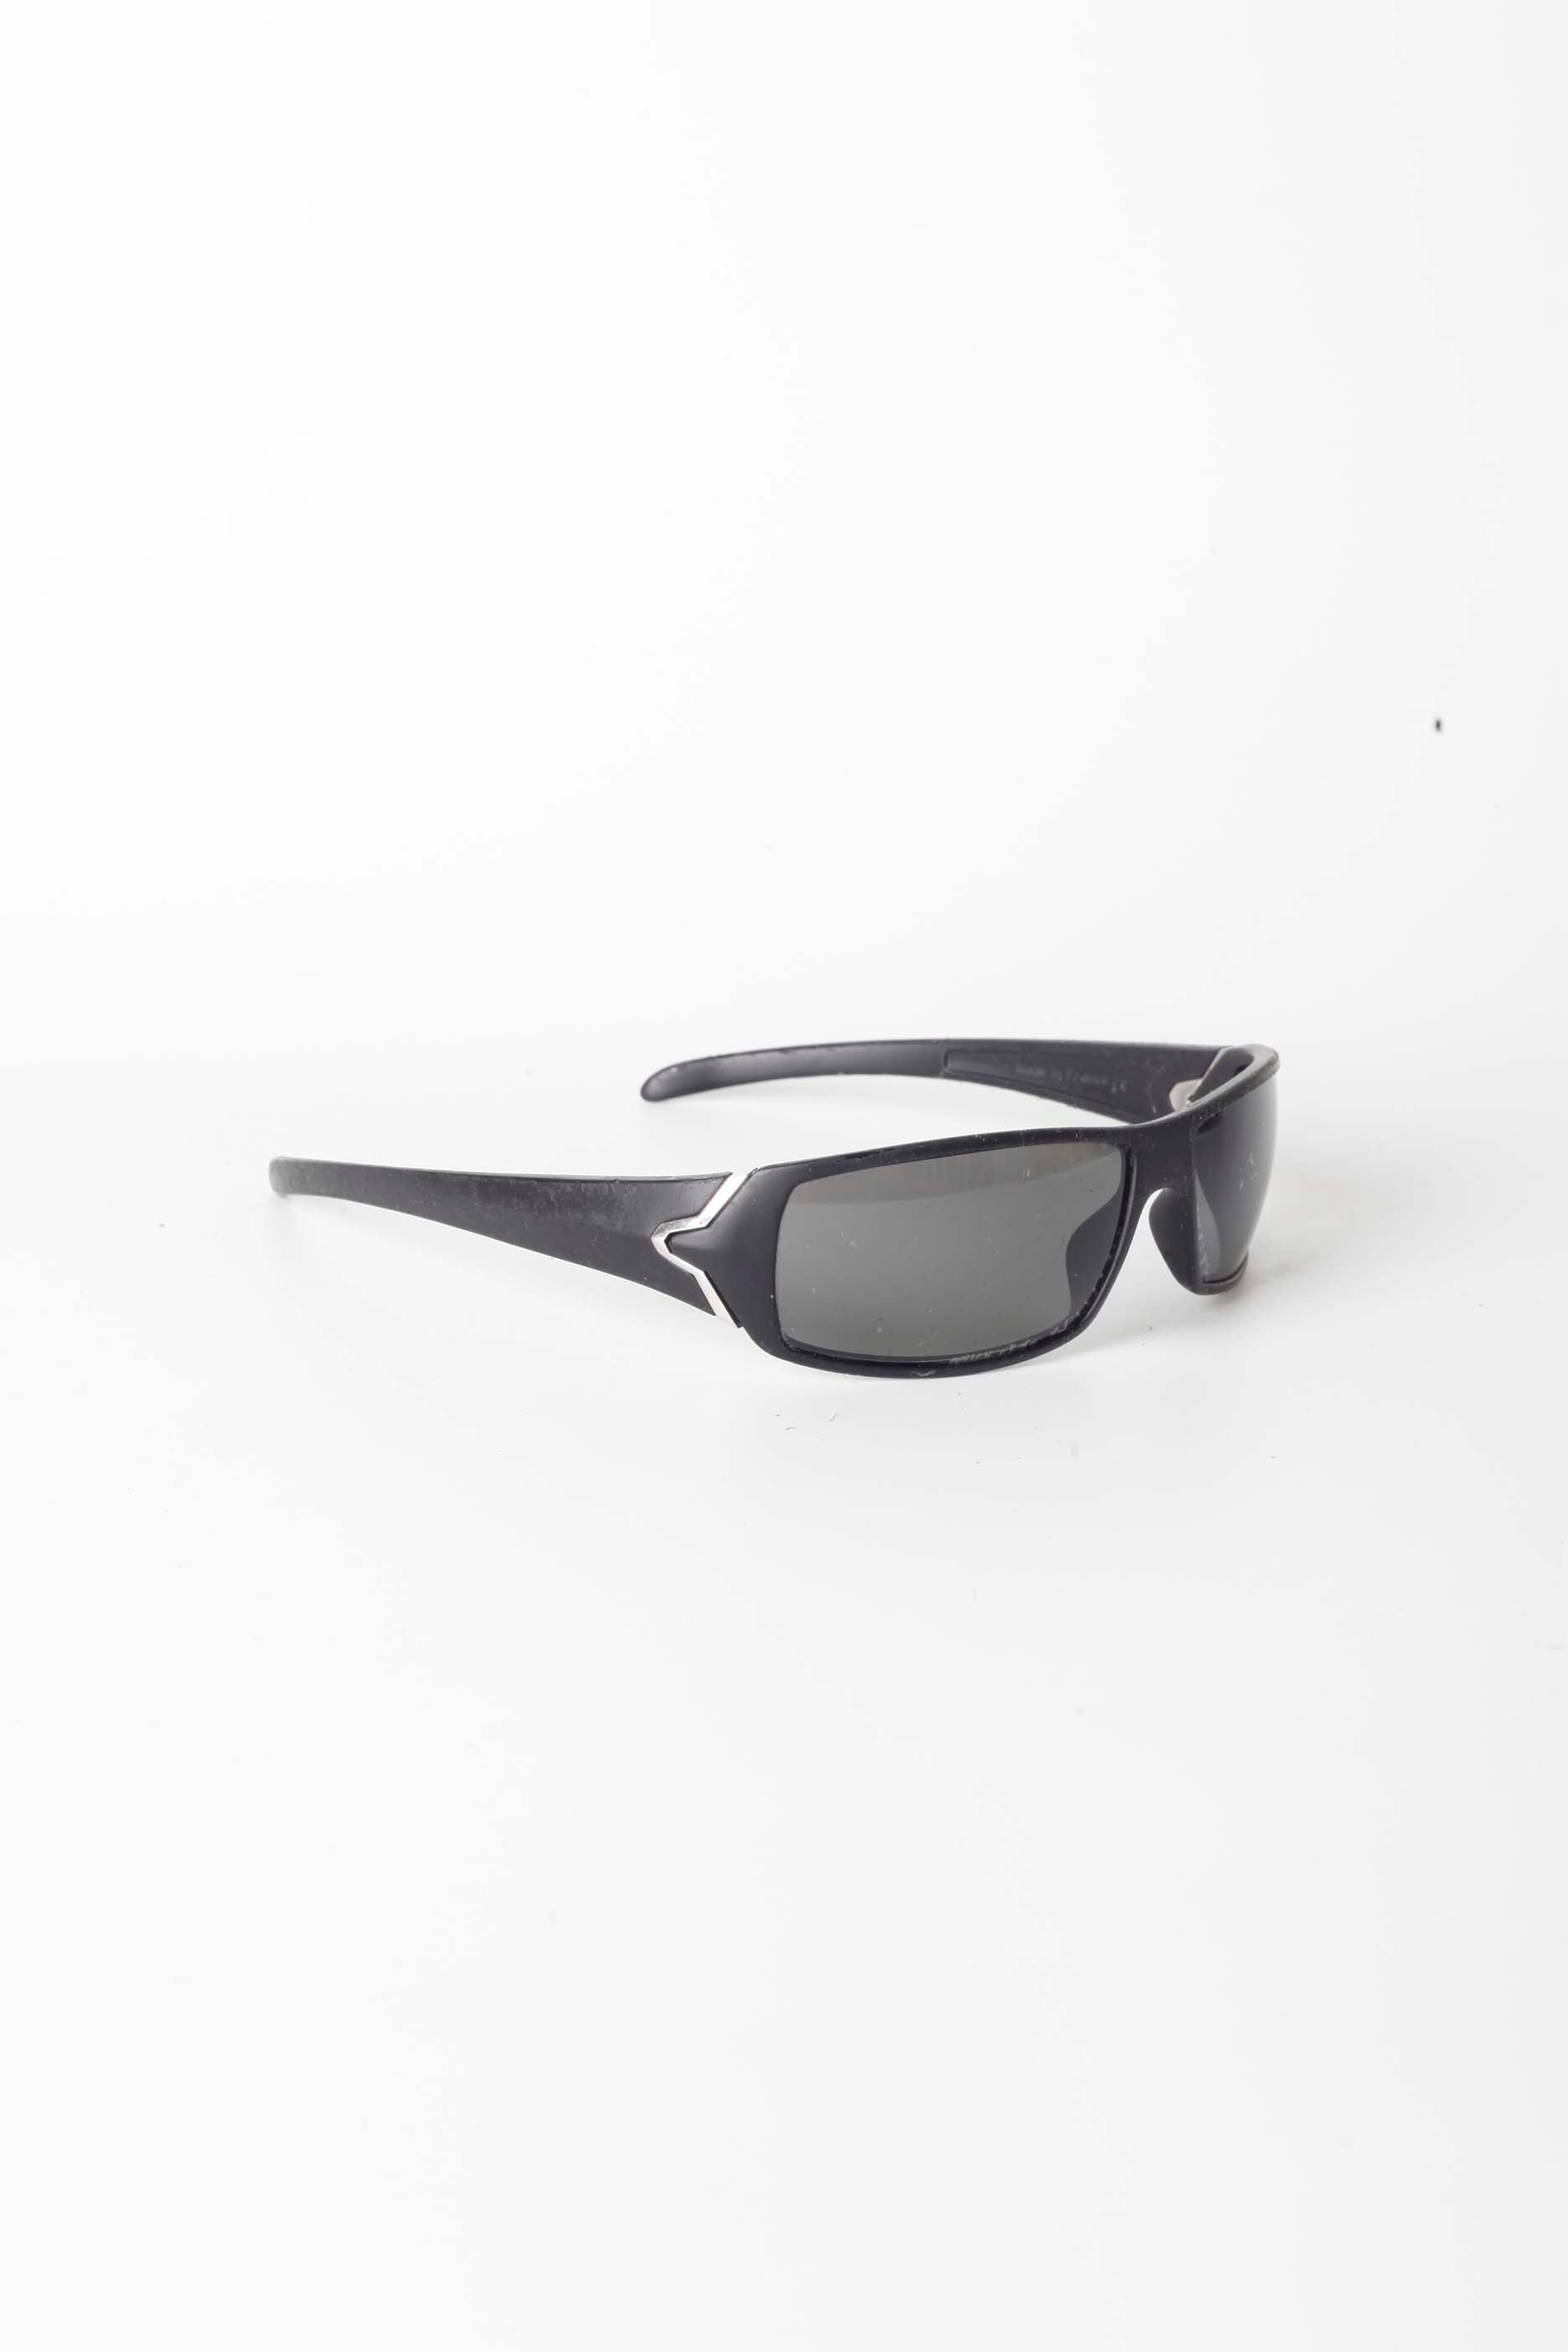 Black Wrap Around Sunglasses with Silver Detail